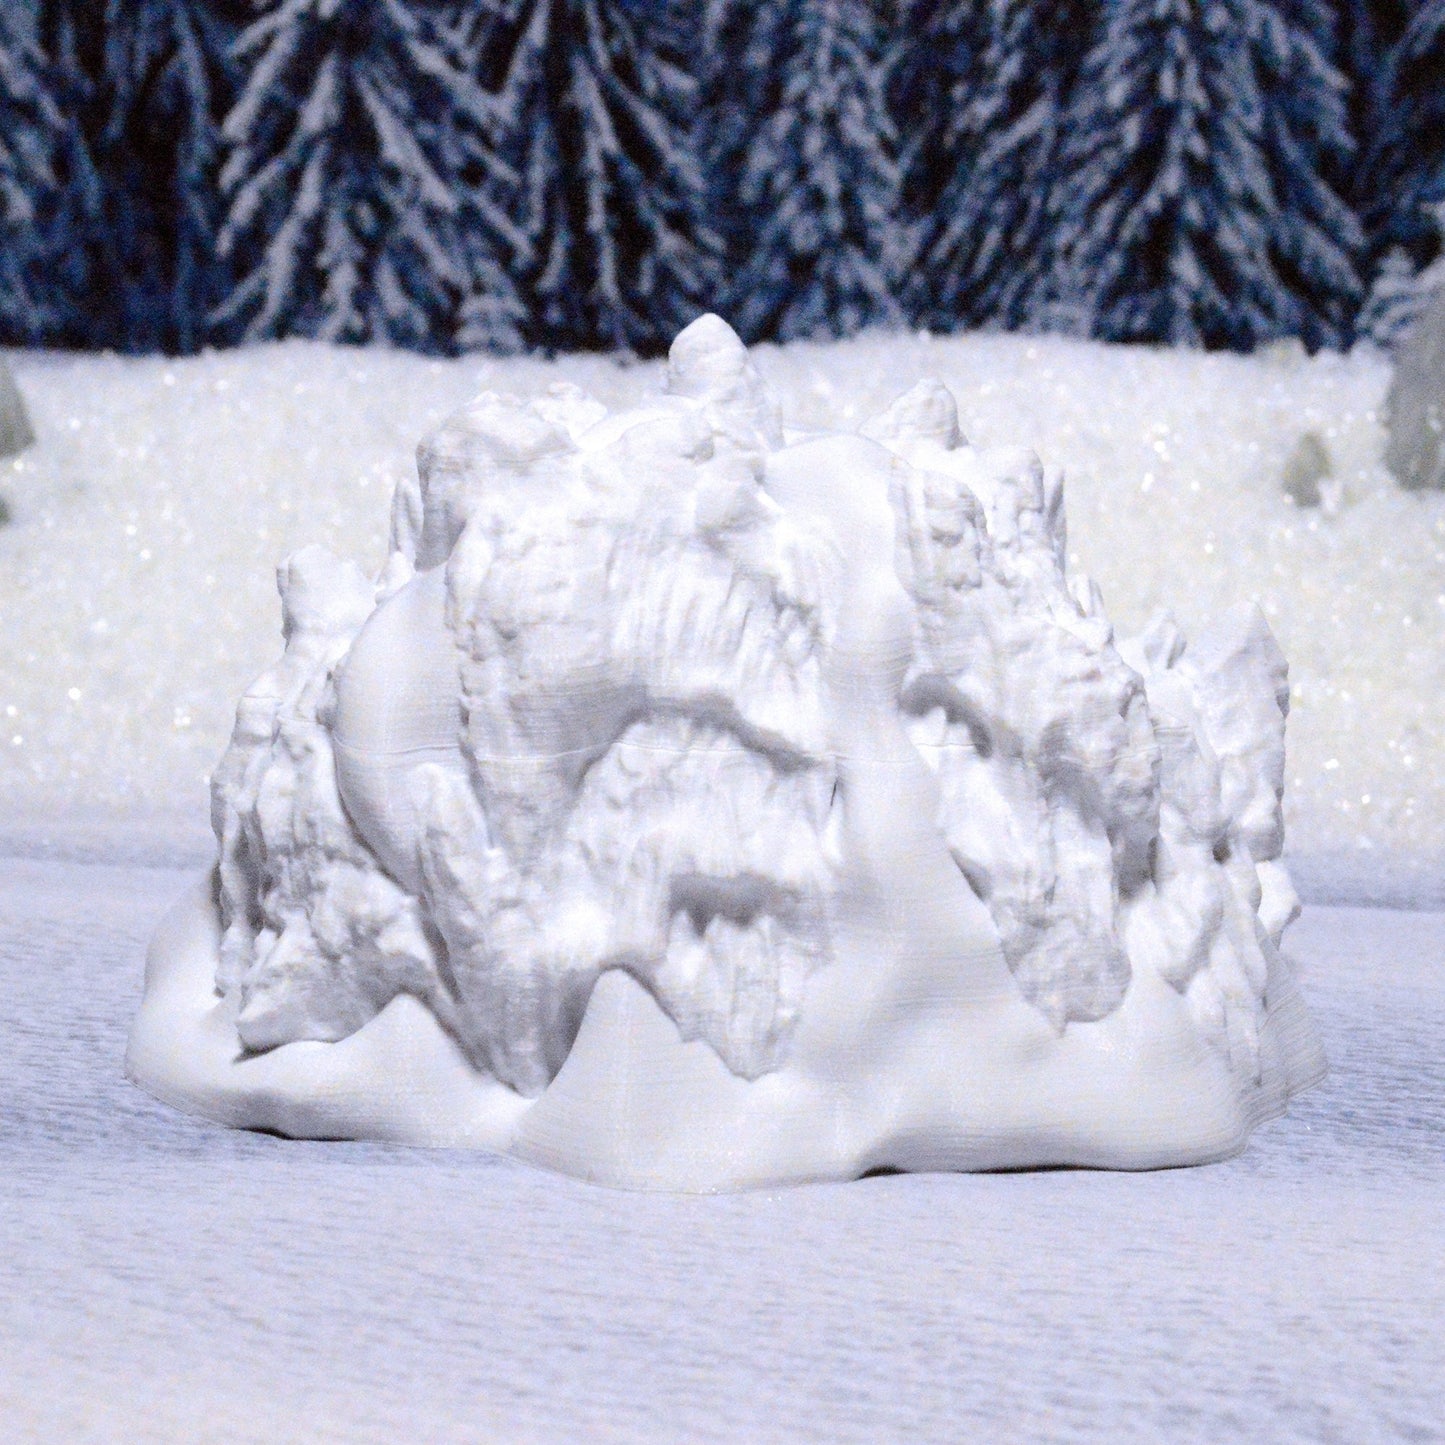 Ice Cave 15mm 28mm 32mm for D&D Icewind Dale Terrain, Frostgrave DnD Pathfinder Arctic Snowy Icy Den